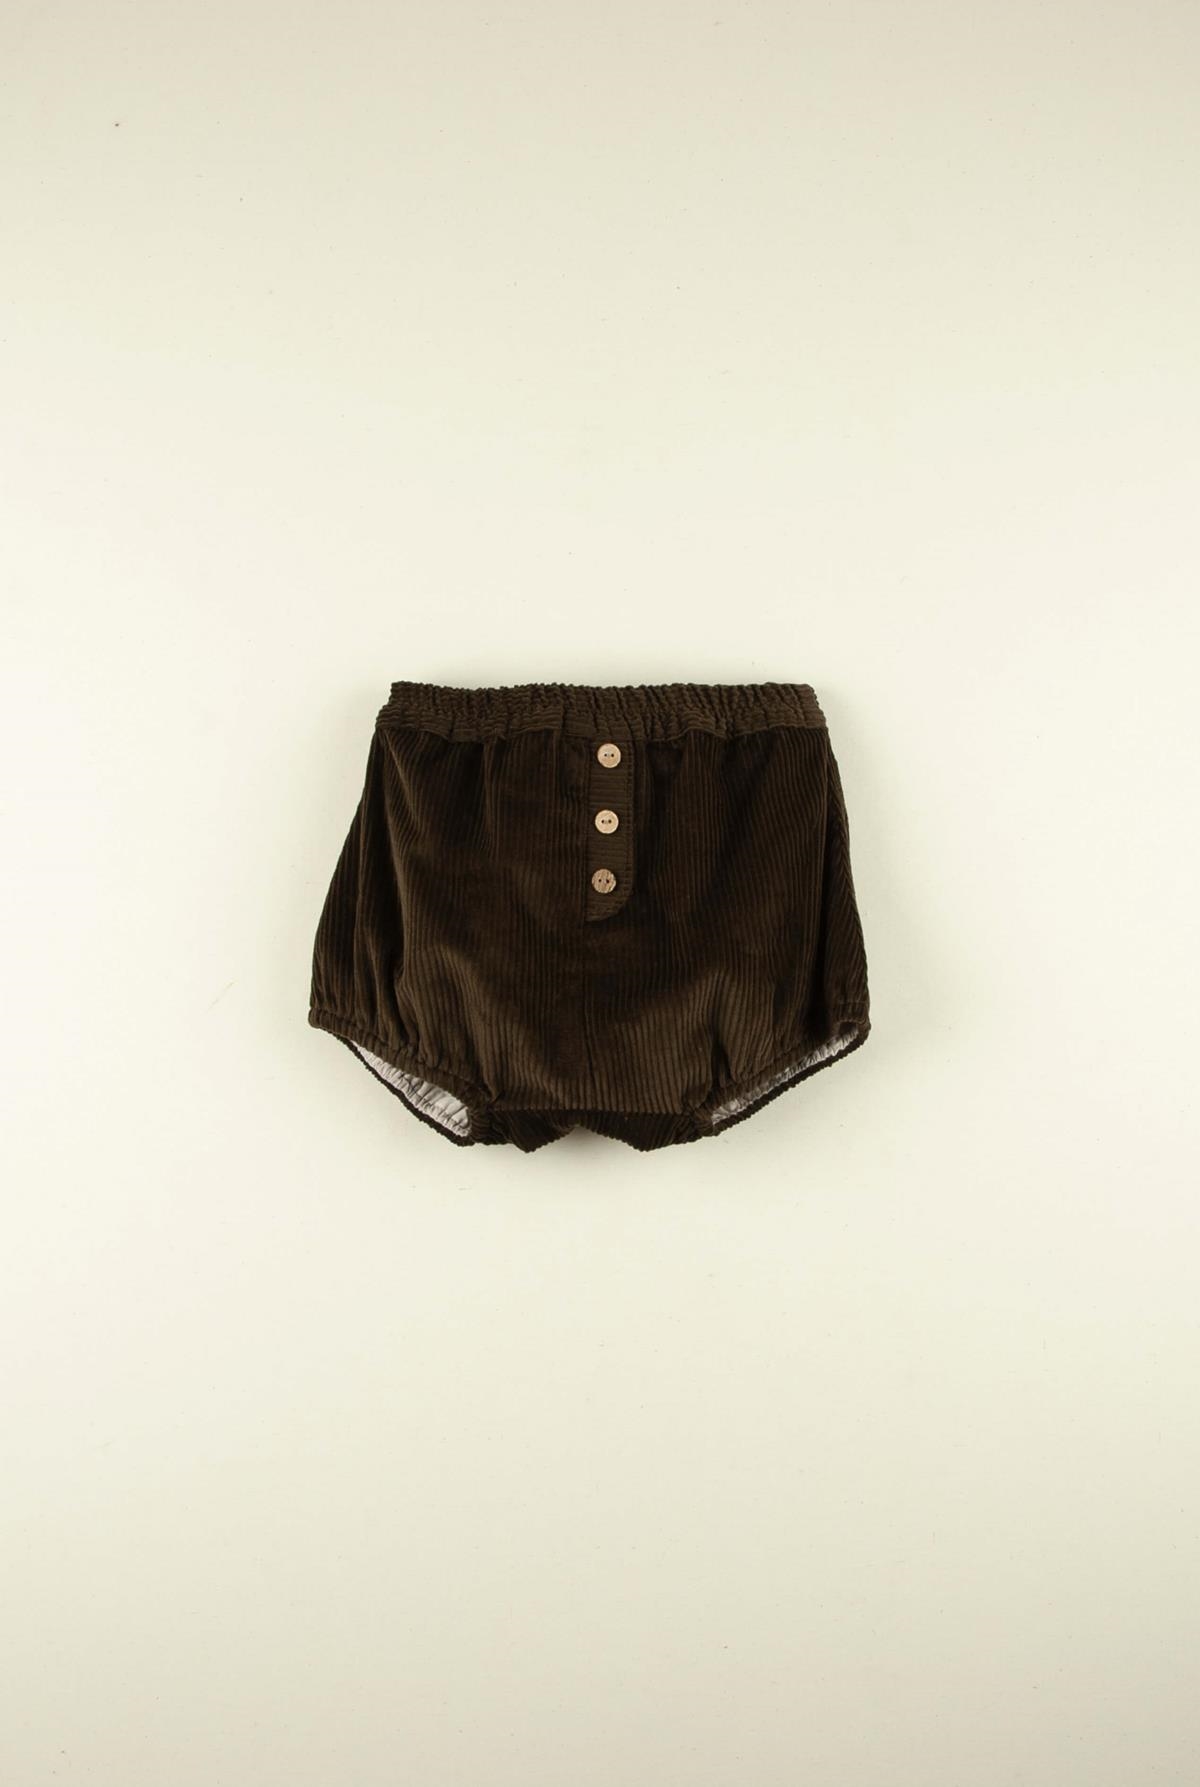 Mod.7.1 Chocolate colour culotte with placket | AW21.22 Mod.7.1 Chocolate colour culotte with placket | 1